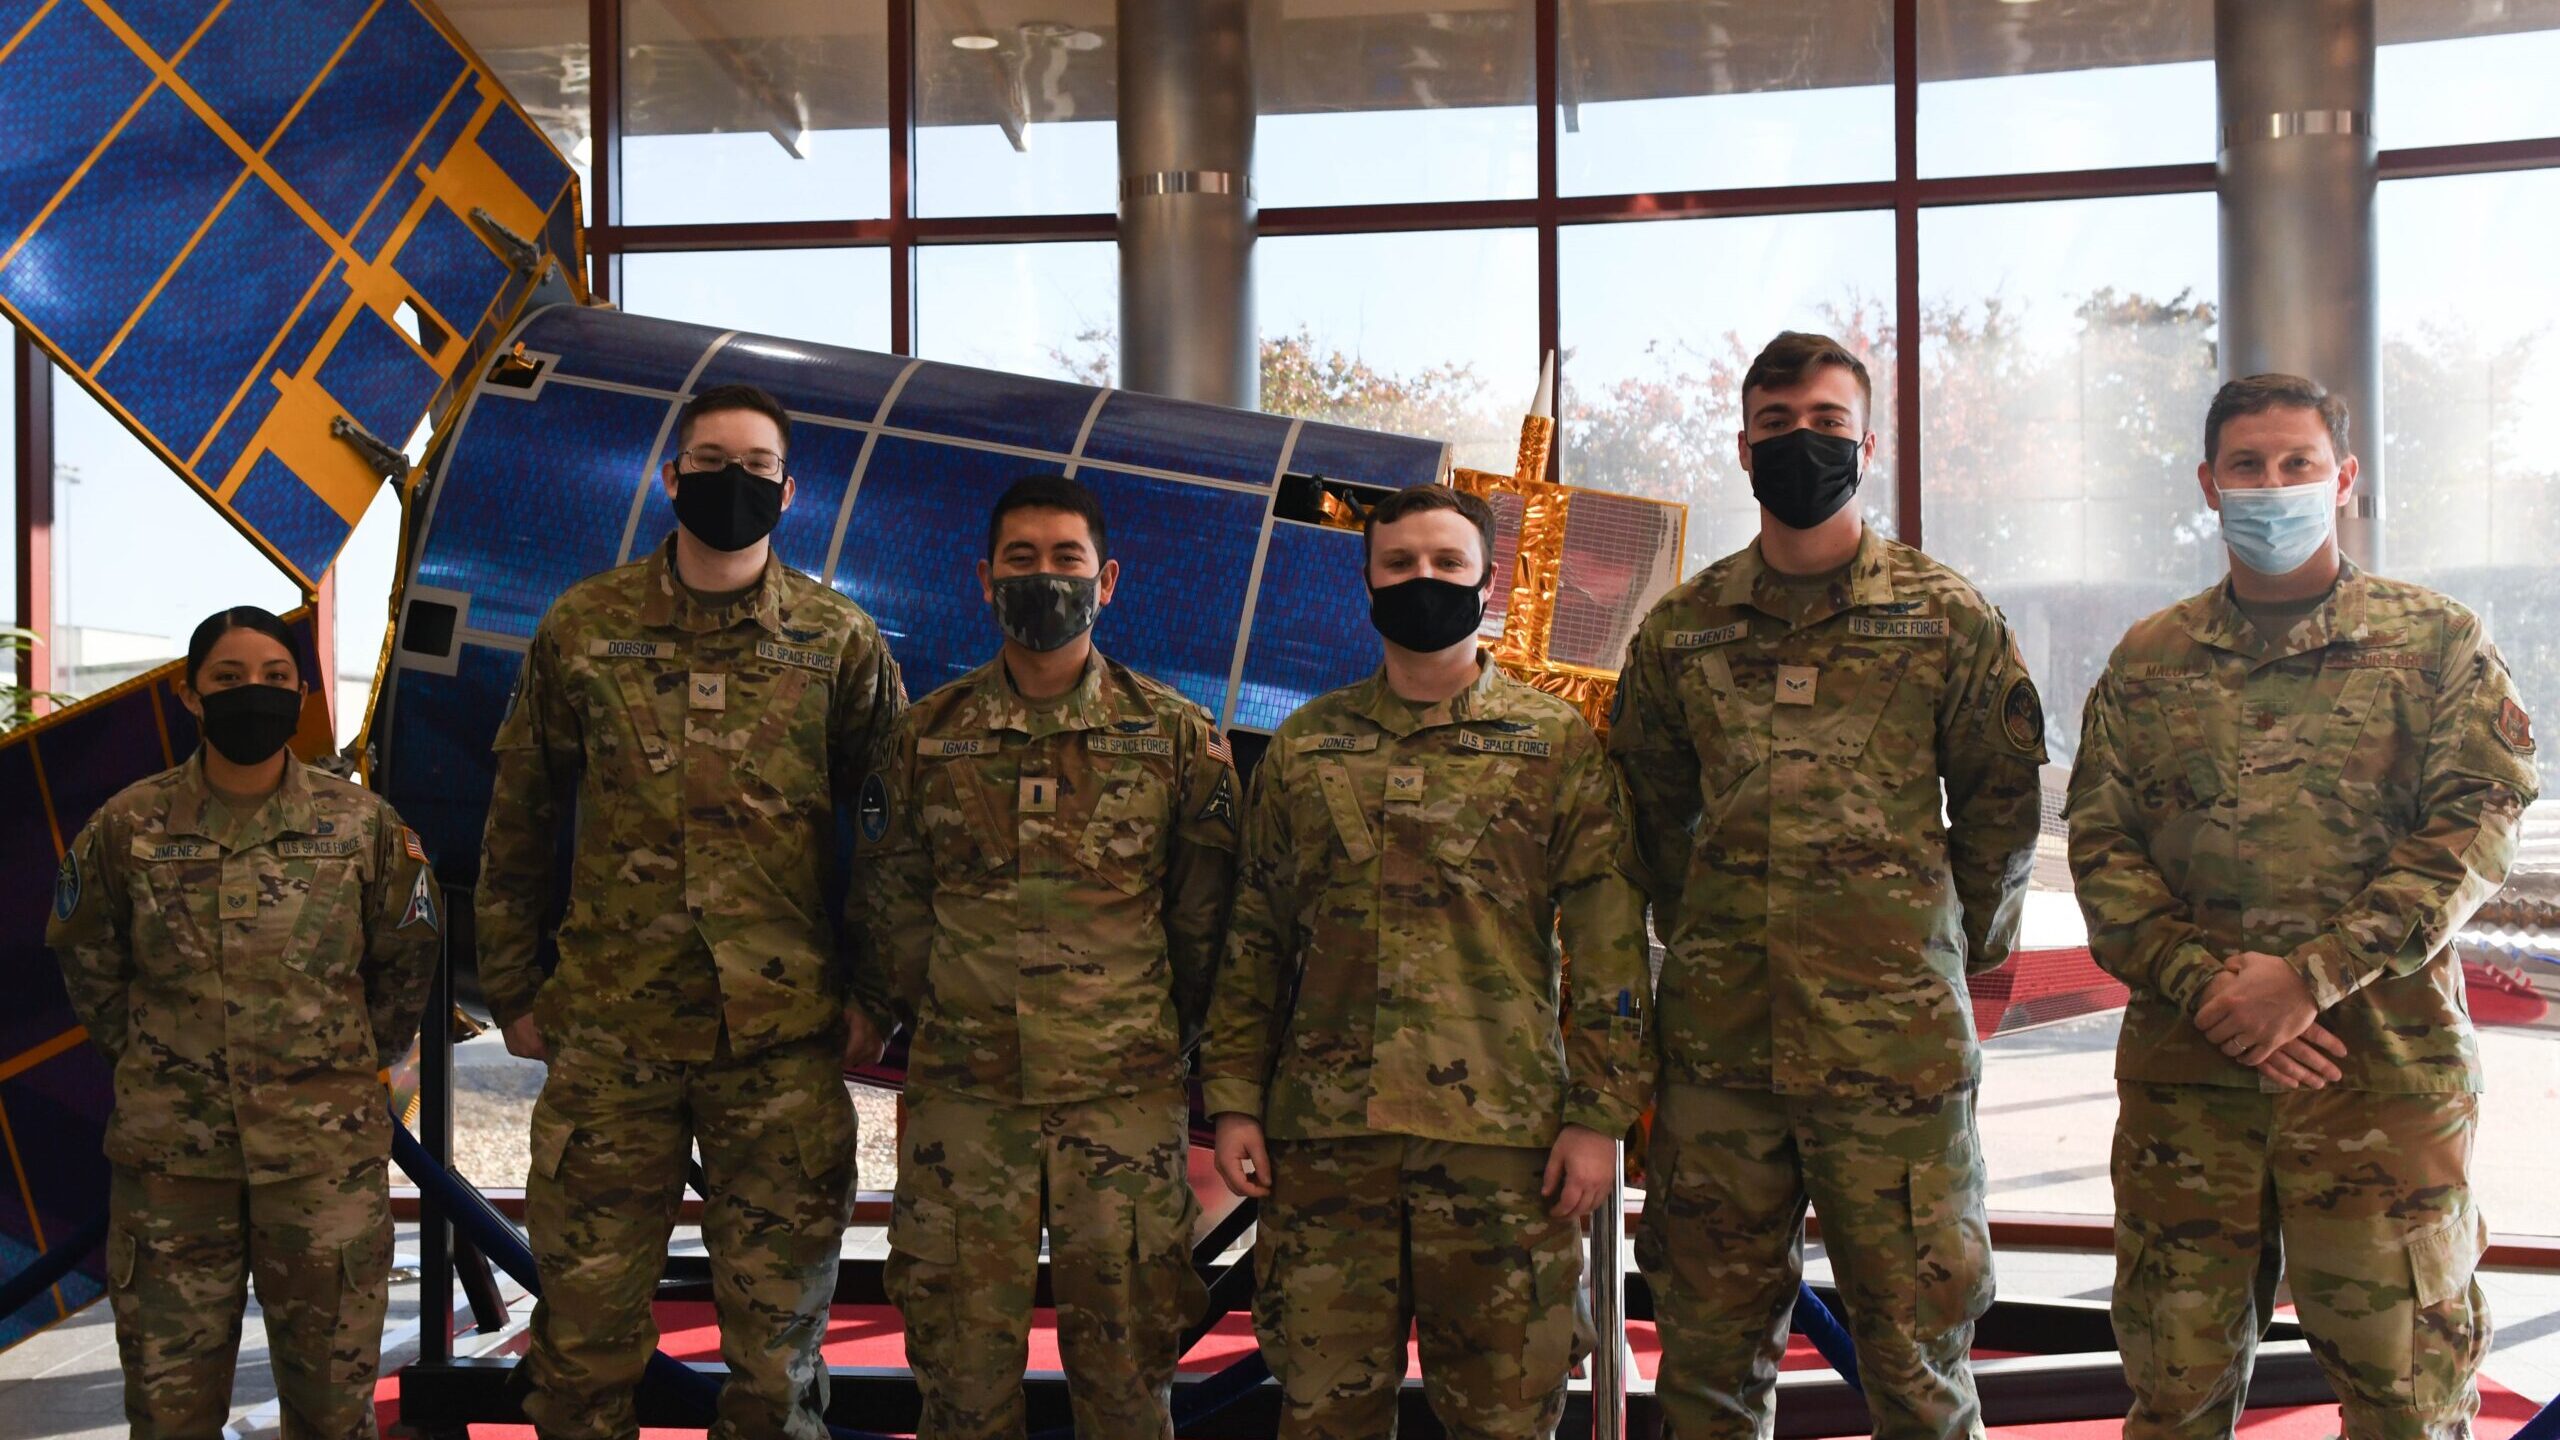 Members from the 2d Space Warning Squadron and 8 SWS pose for a photo in the lobby of the Mission Control Station on Buckley Space Force Base, Colo., Oct. 27, 2021. These members participated in the Coalition Virtual Flag exercise which focuses on Coalition Major Combat Operations in a realistic theater against a near-peer threat in a dynamic training environment. (U.S. Space Force photo by Senior Airman Haley N. Blevins)